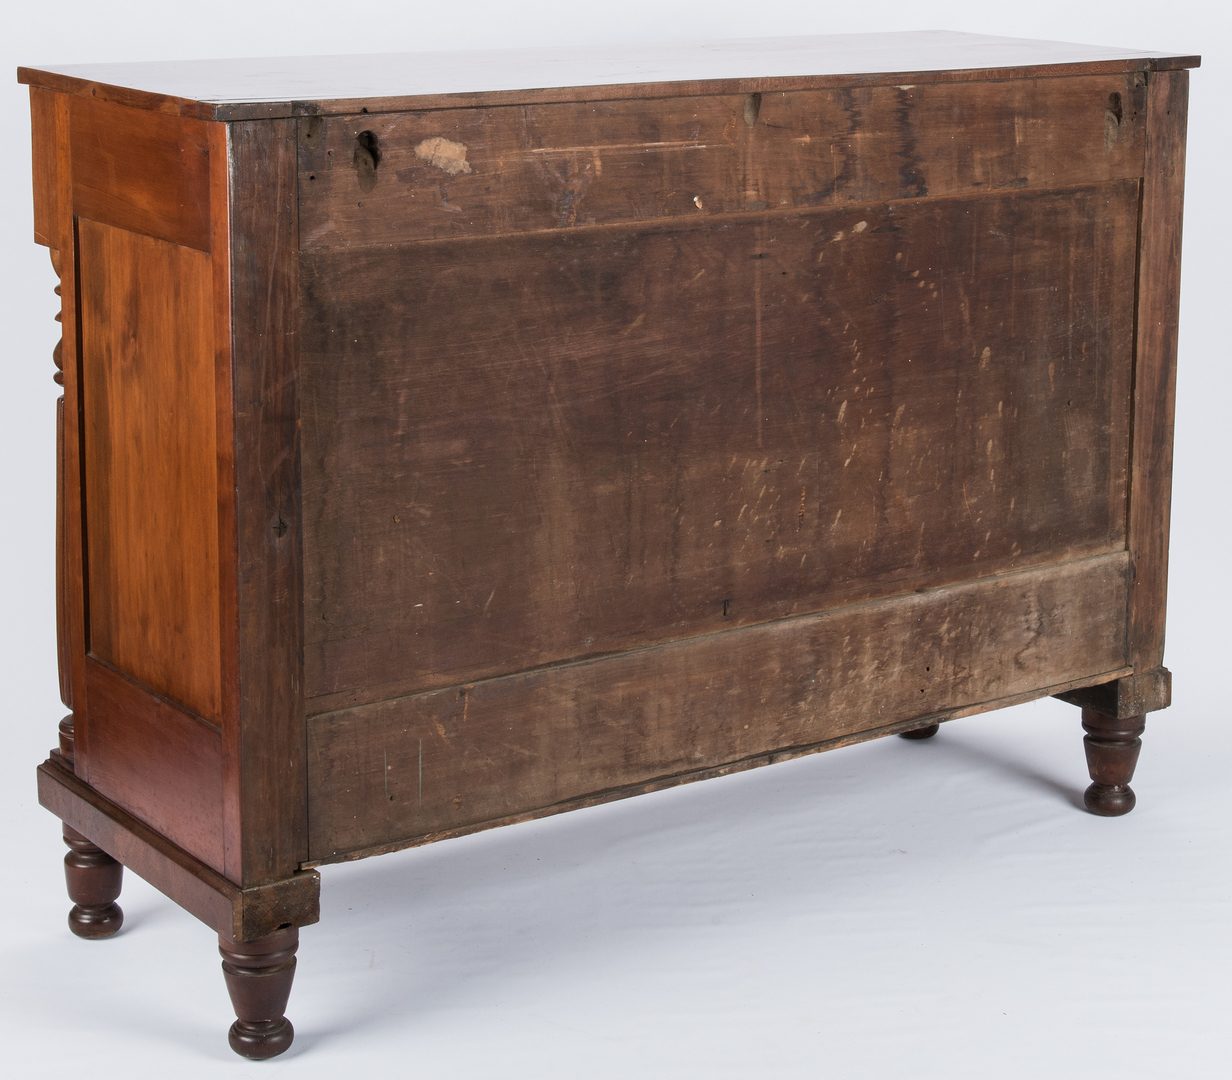 Lot 610: Southern Classical Sideboard, TN History